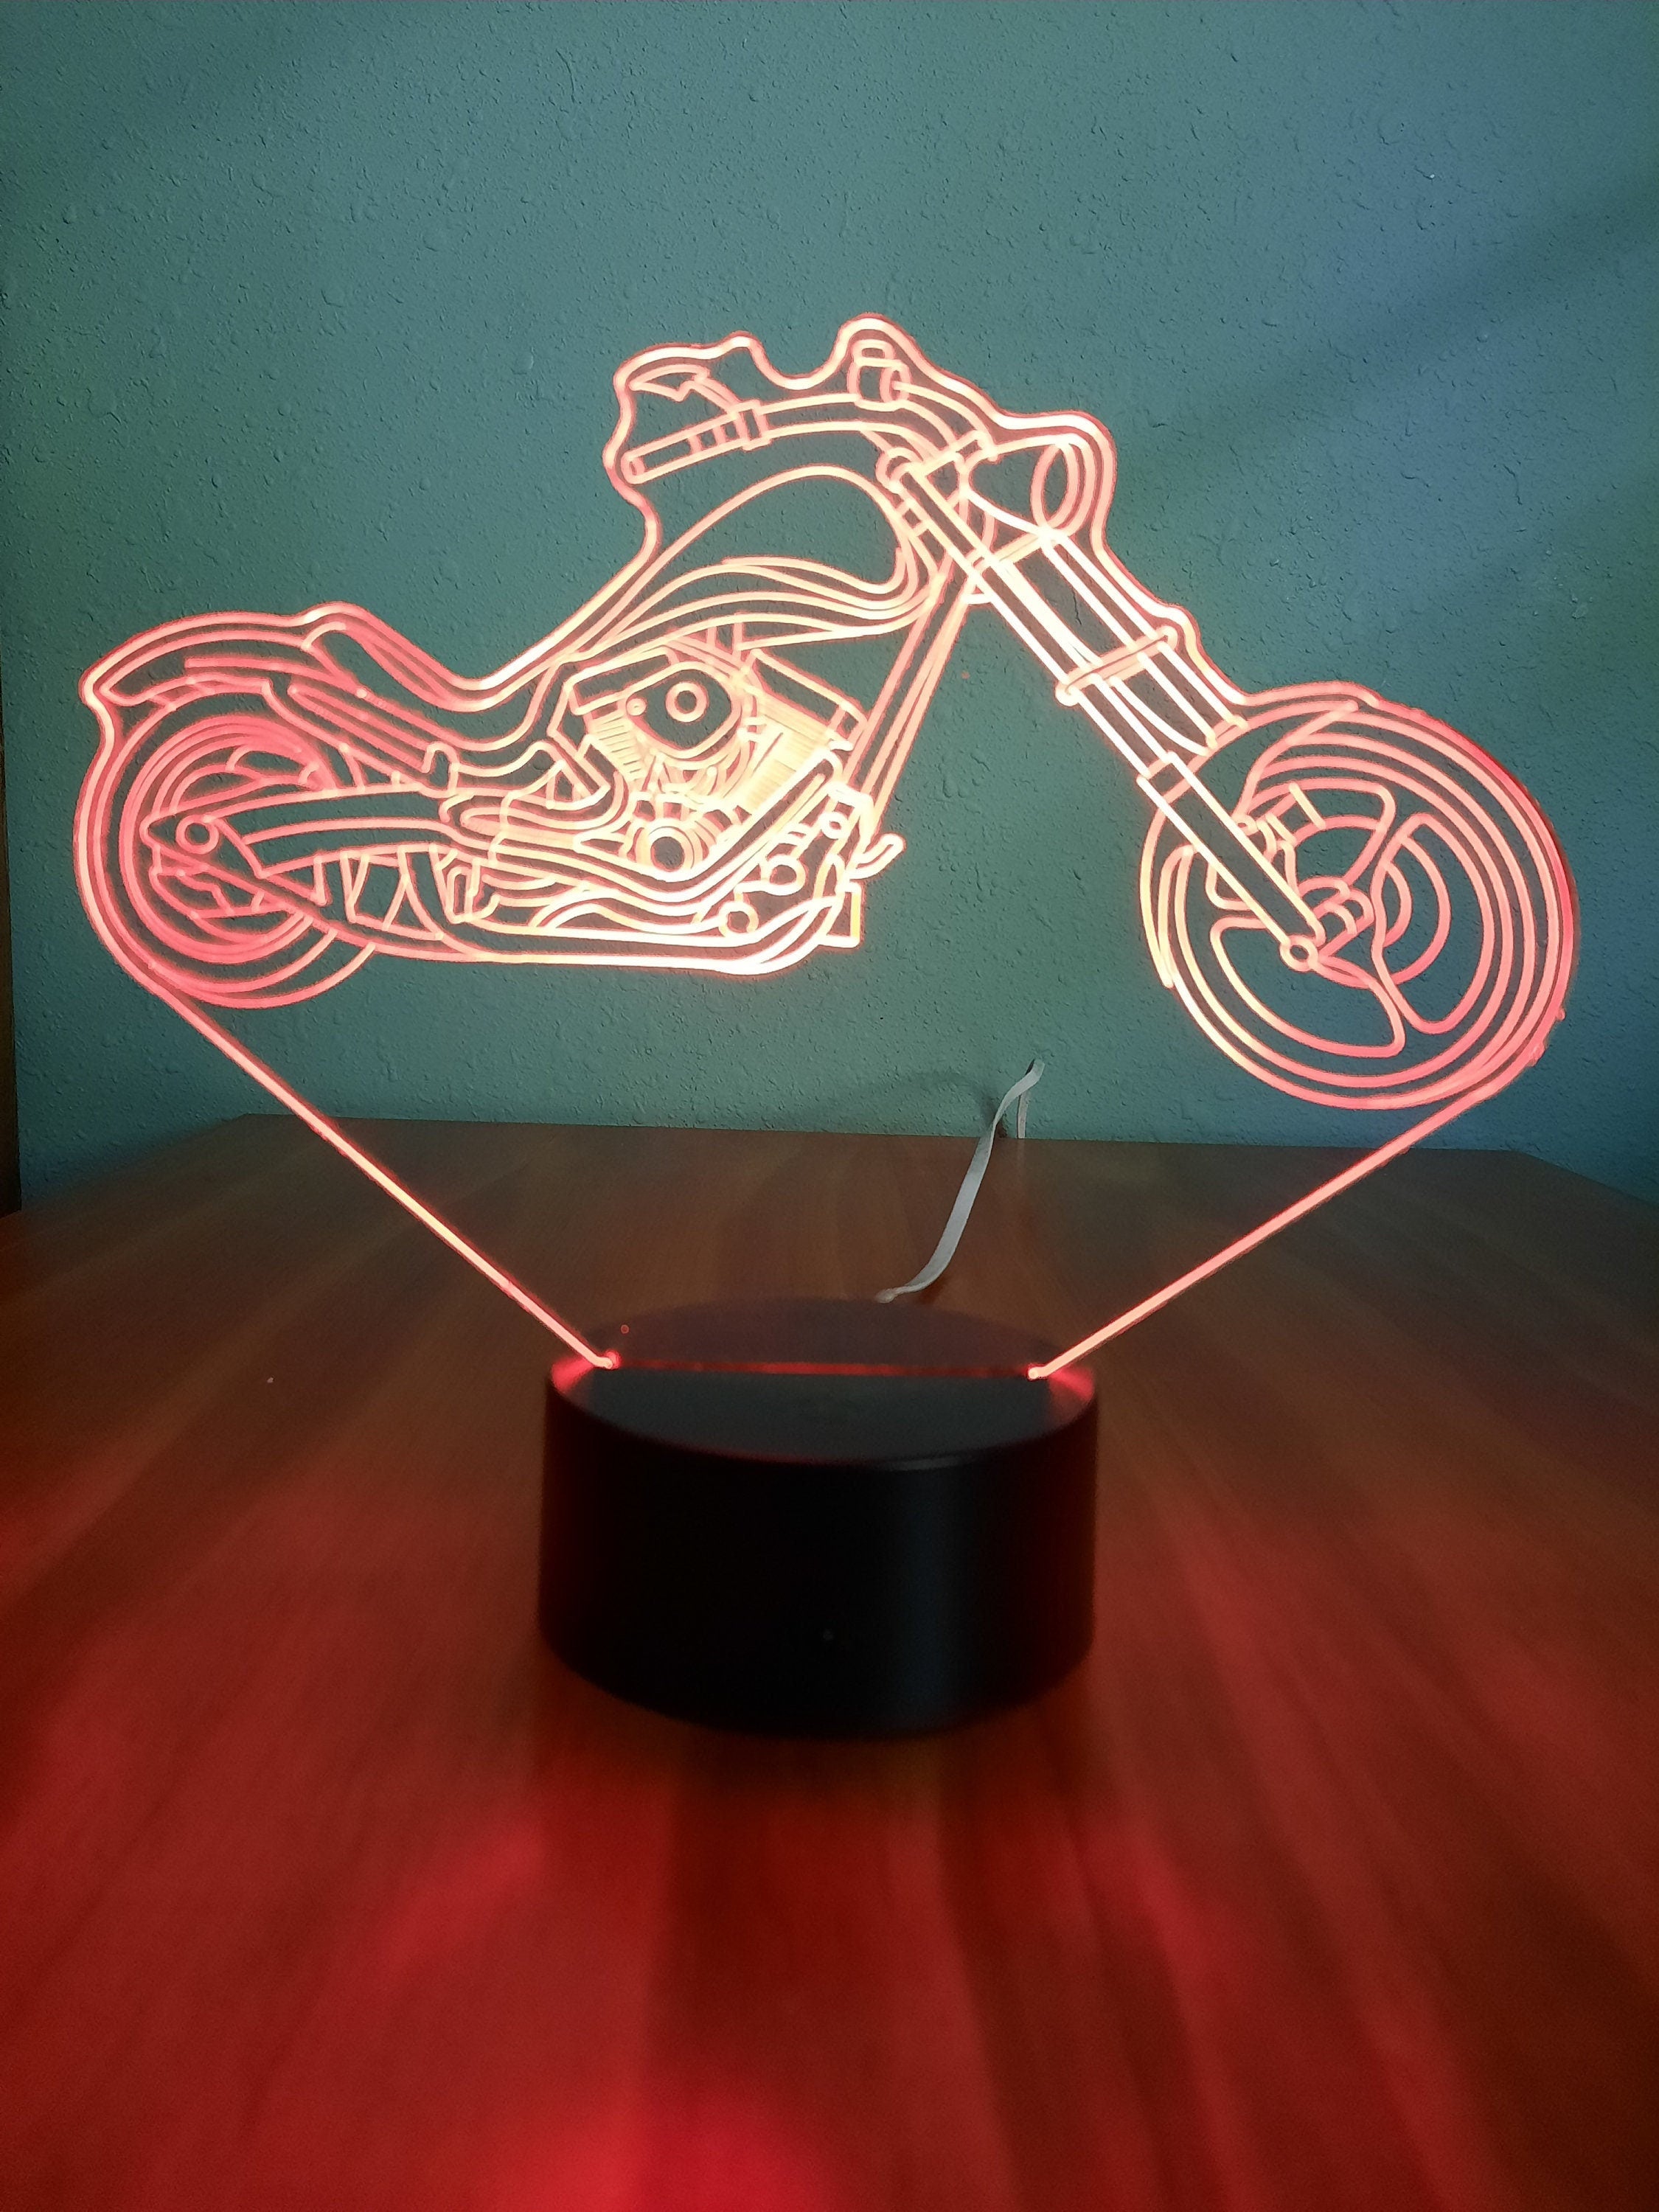 Awesome "Chopper Motorcycle" 3D LED Lamp (2671) - FREE SHIPPING!